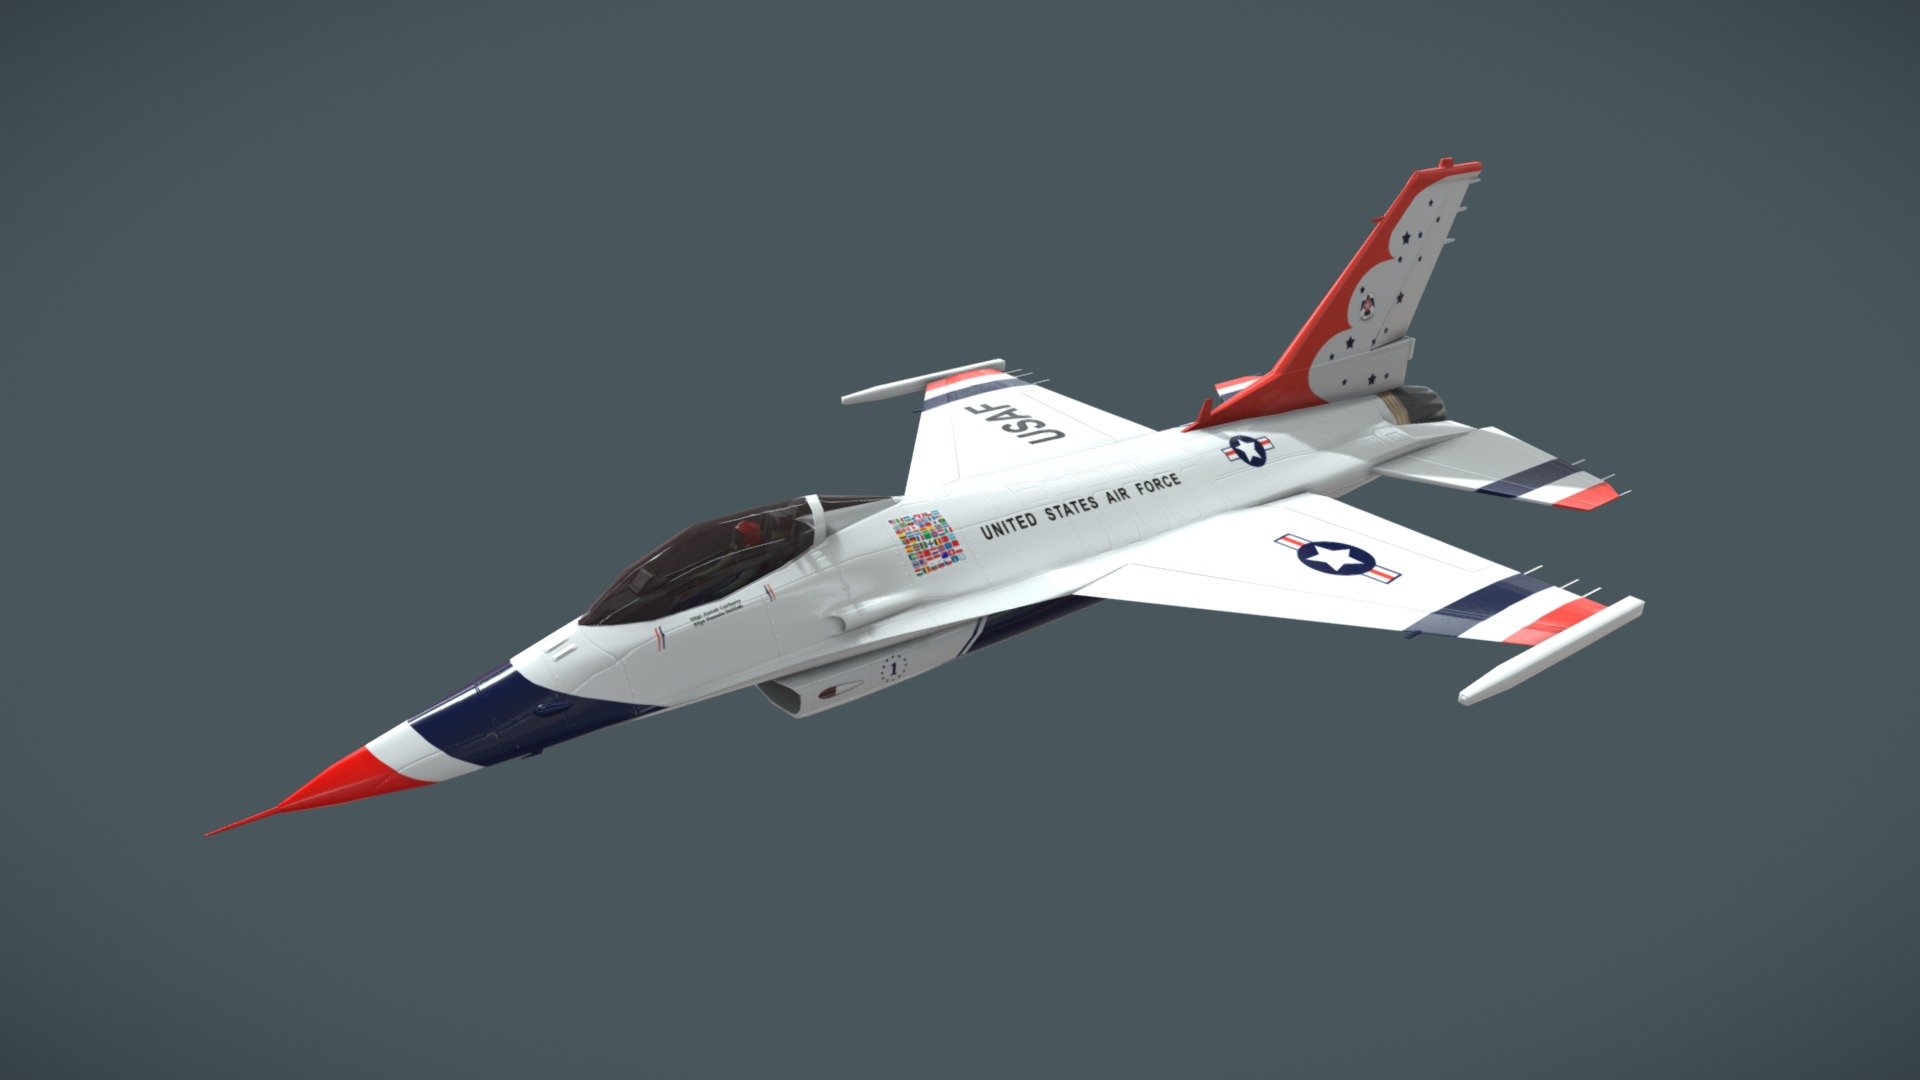 Low poly model of a USAF F-16 Thunderbird.

Modeled in Maya. Textured in Substance Painter 3d model